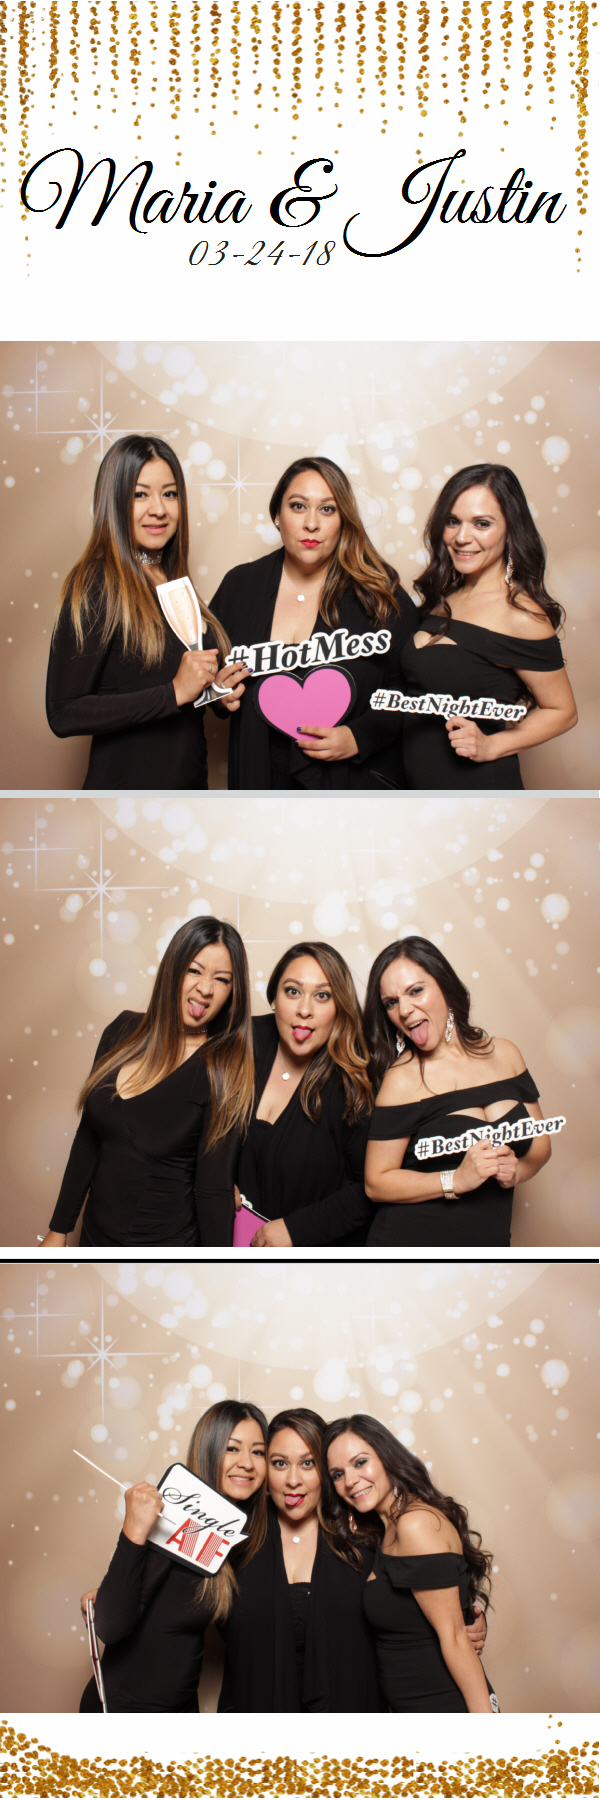 2x6 photo strip of group of women posing with props and light bokeh backdrop